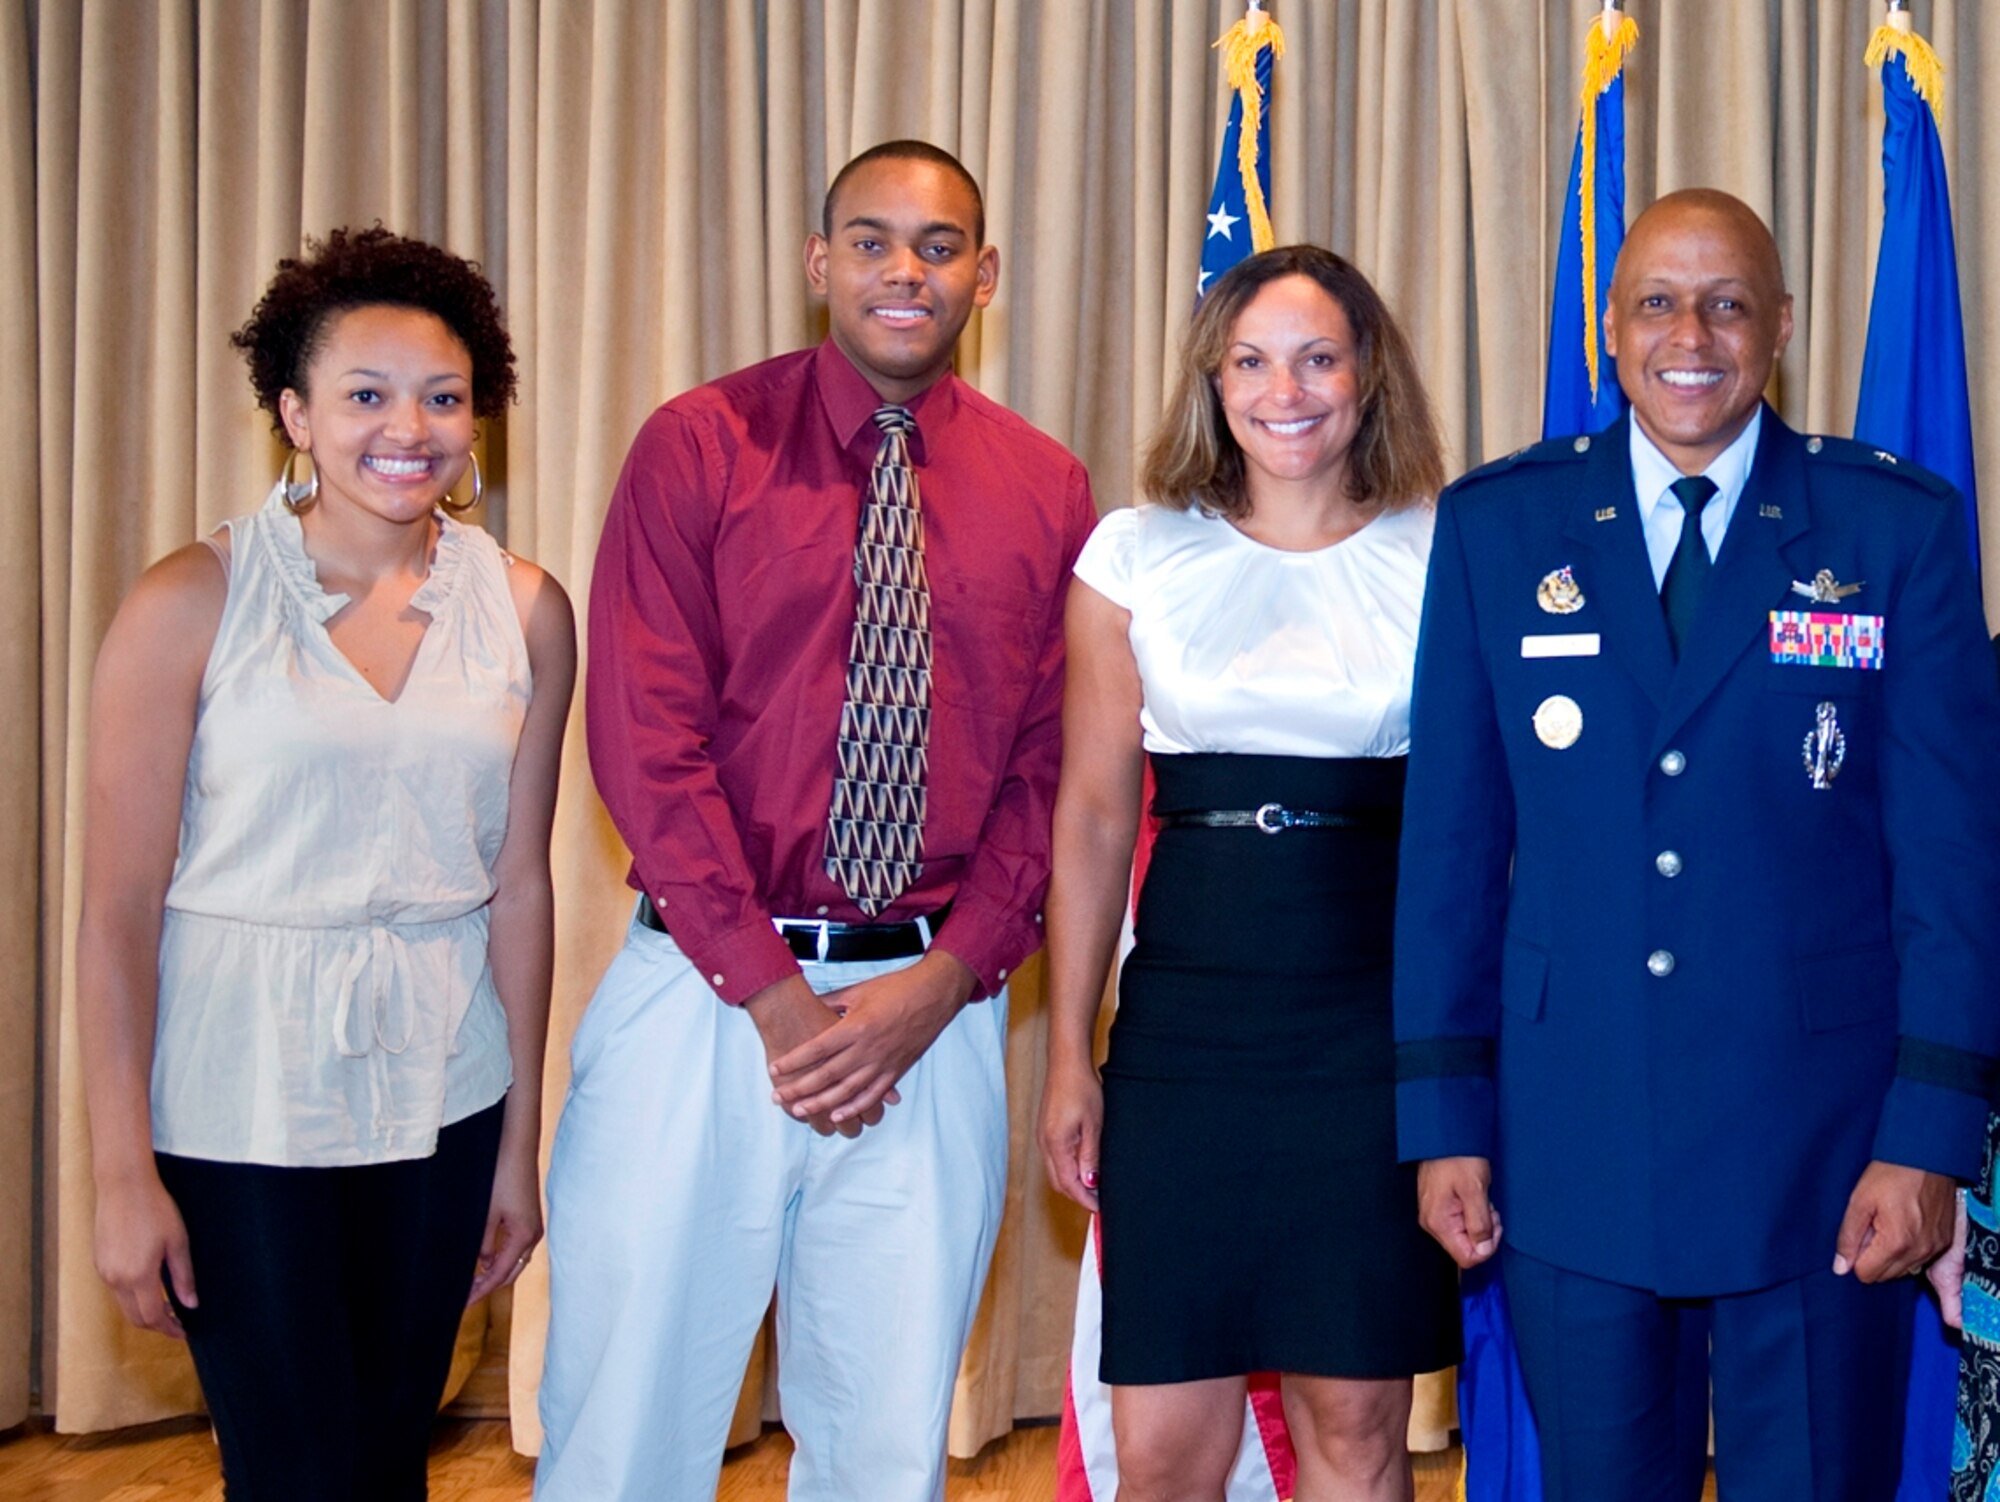 From right, 45th Space Wing Commander Brig. Gen. Anthony Cotton, wife Marsha, son Russel and daughter Brianna, at the wing’s change of command reception Aug. 30 at The Tides. (Air Force Photo/Julie Dayringer)